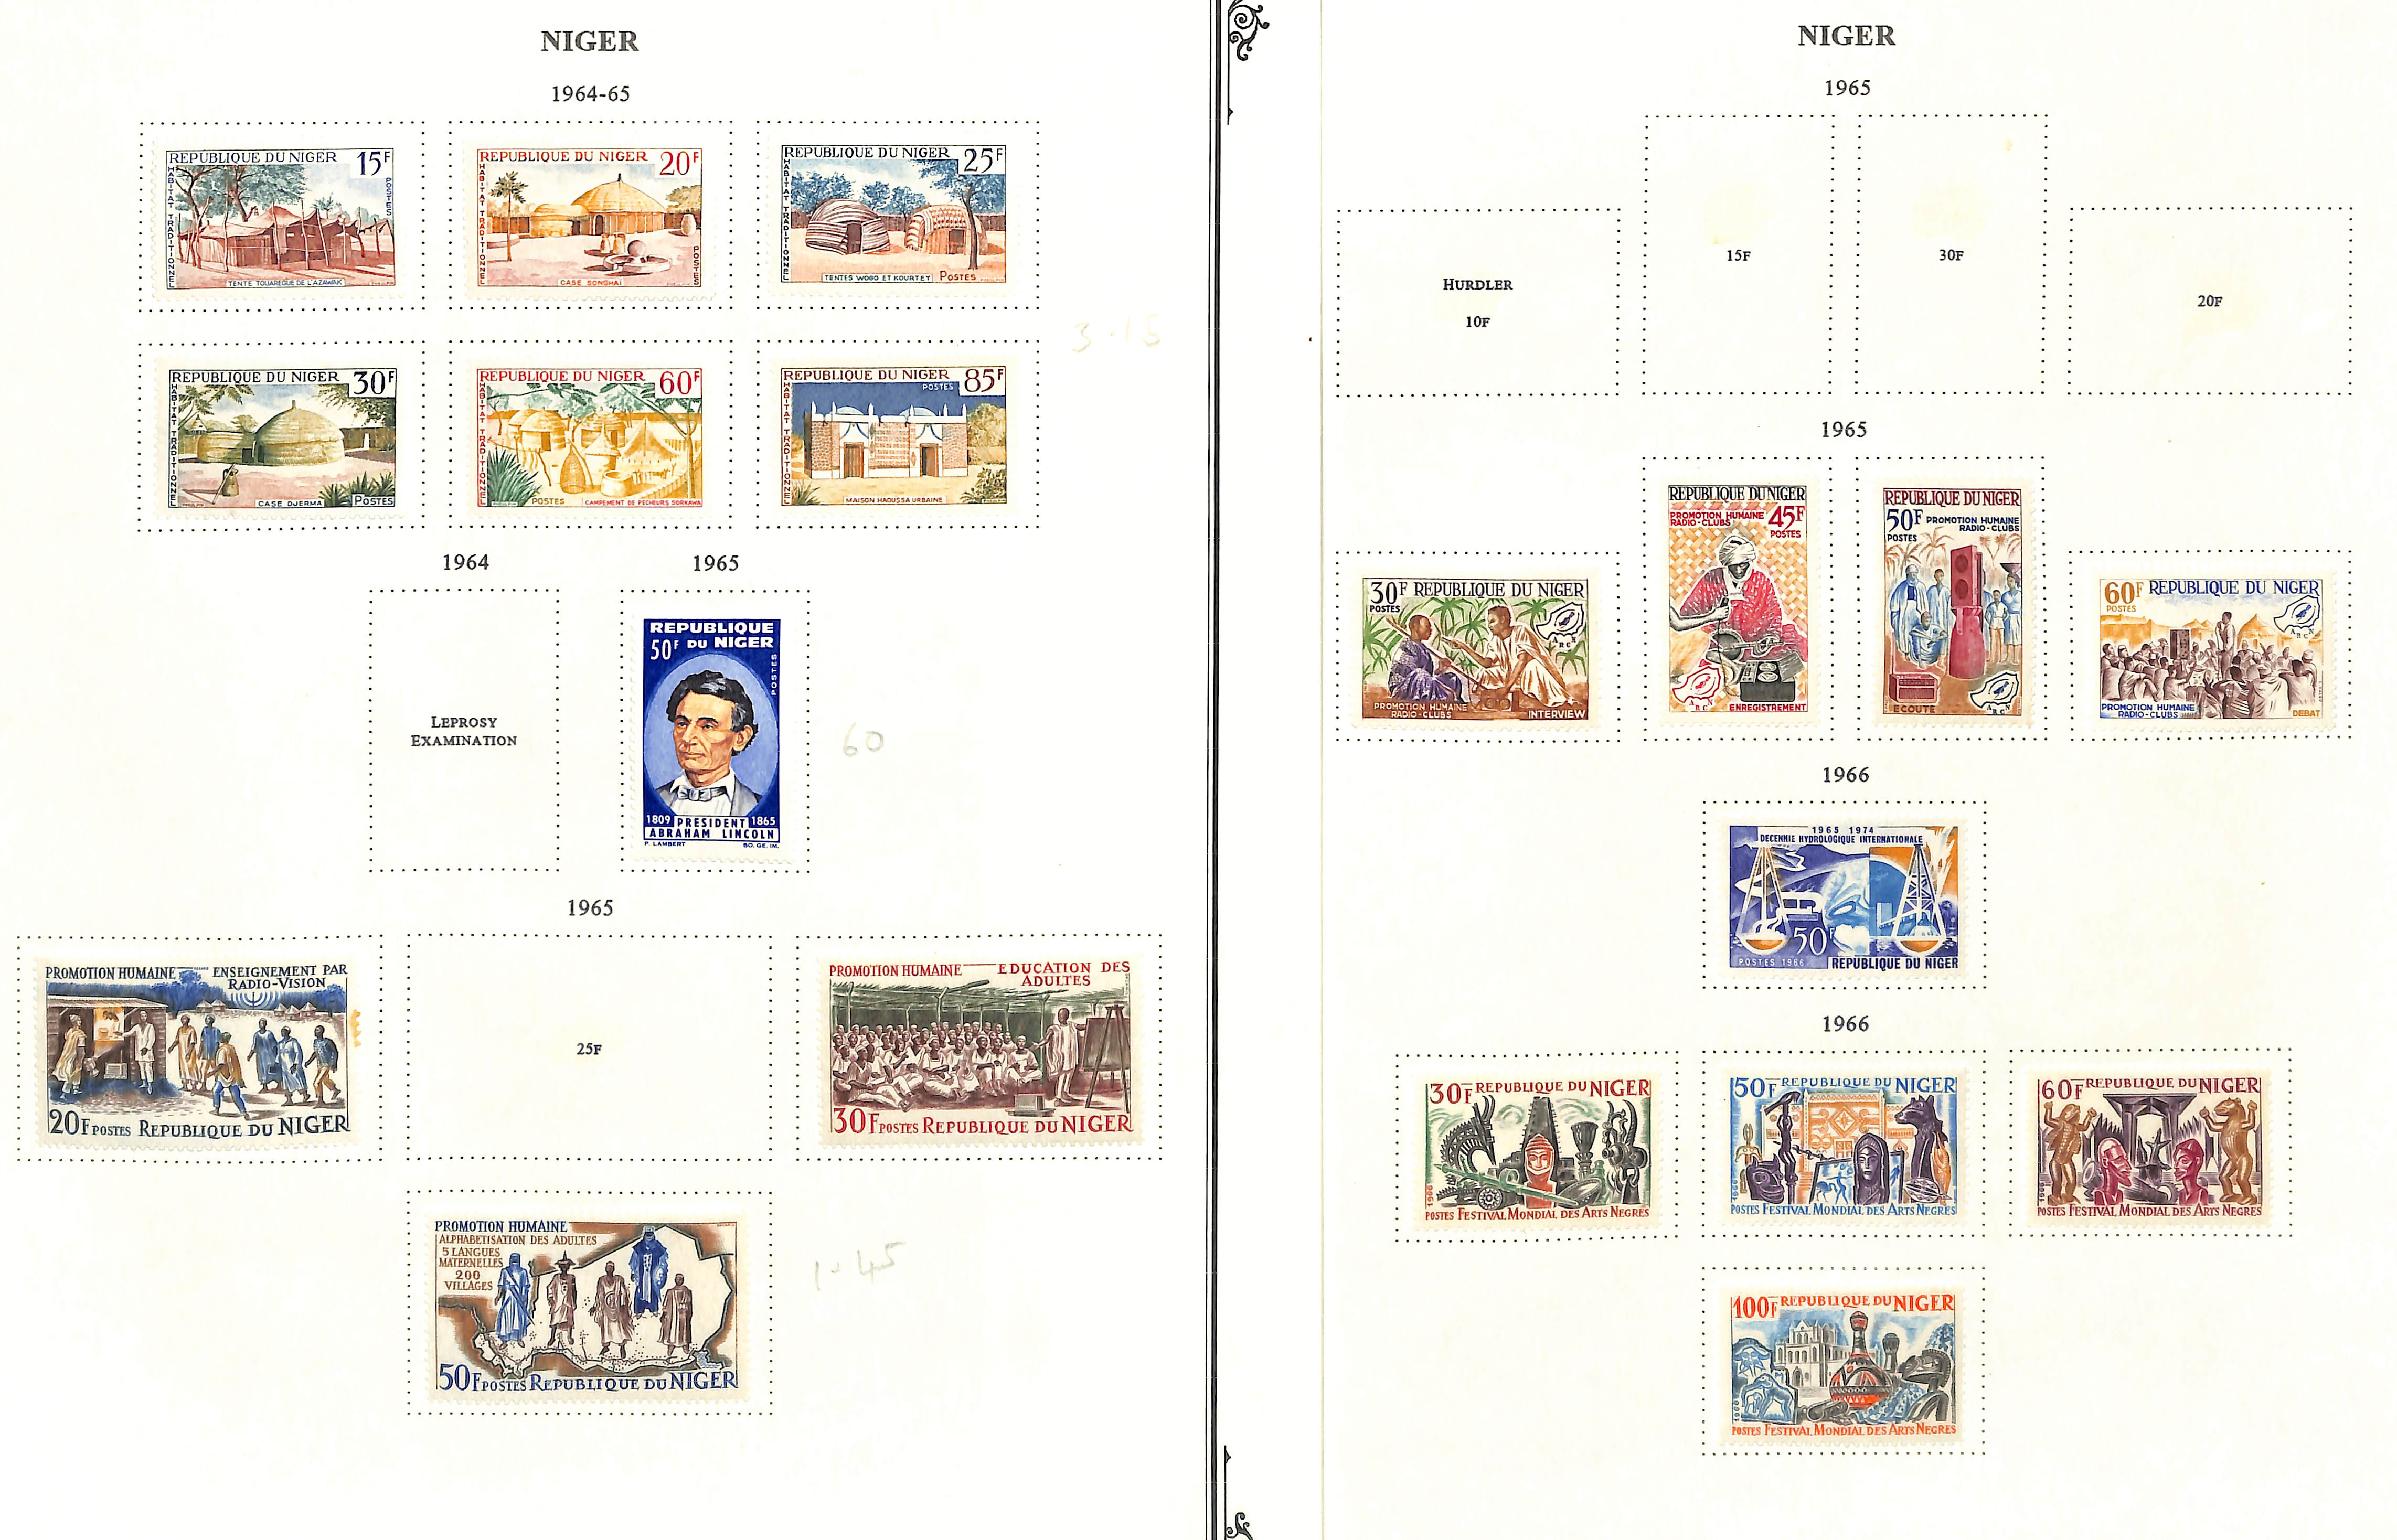 Niger. 1921 - c.1990 Mint and used collection with covers, die and plate proofs. (100s). - Image 7 of 26